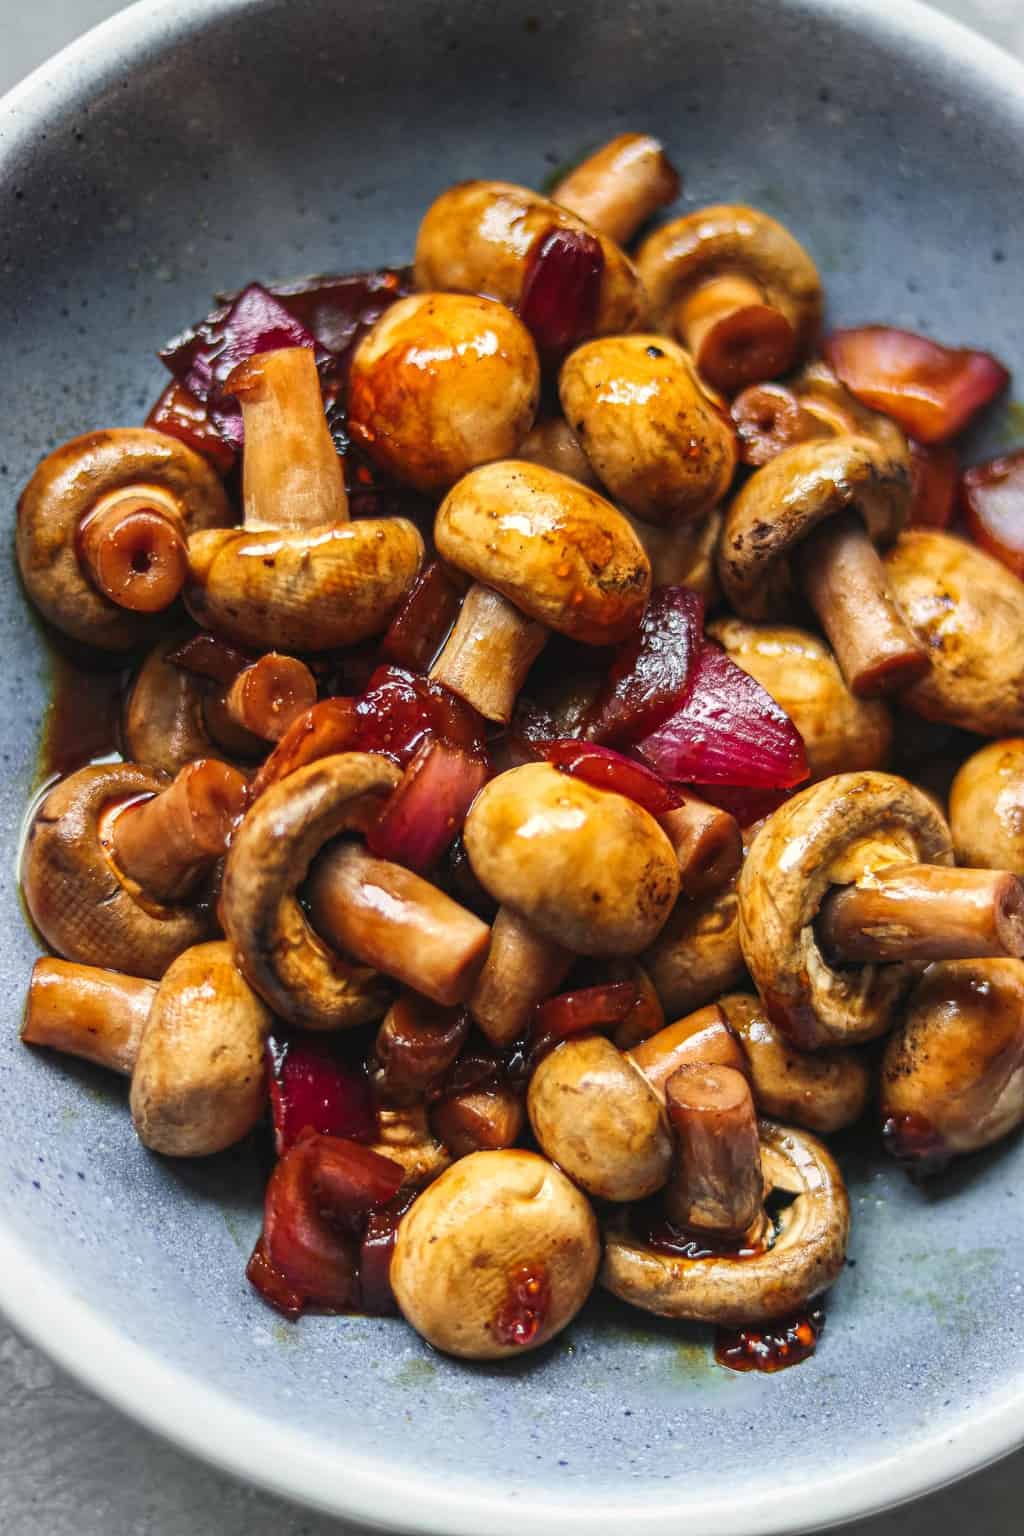 Button mushrooms in a blue bowl